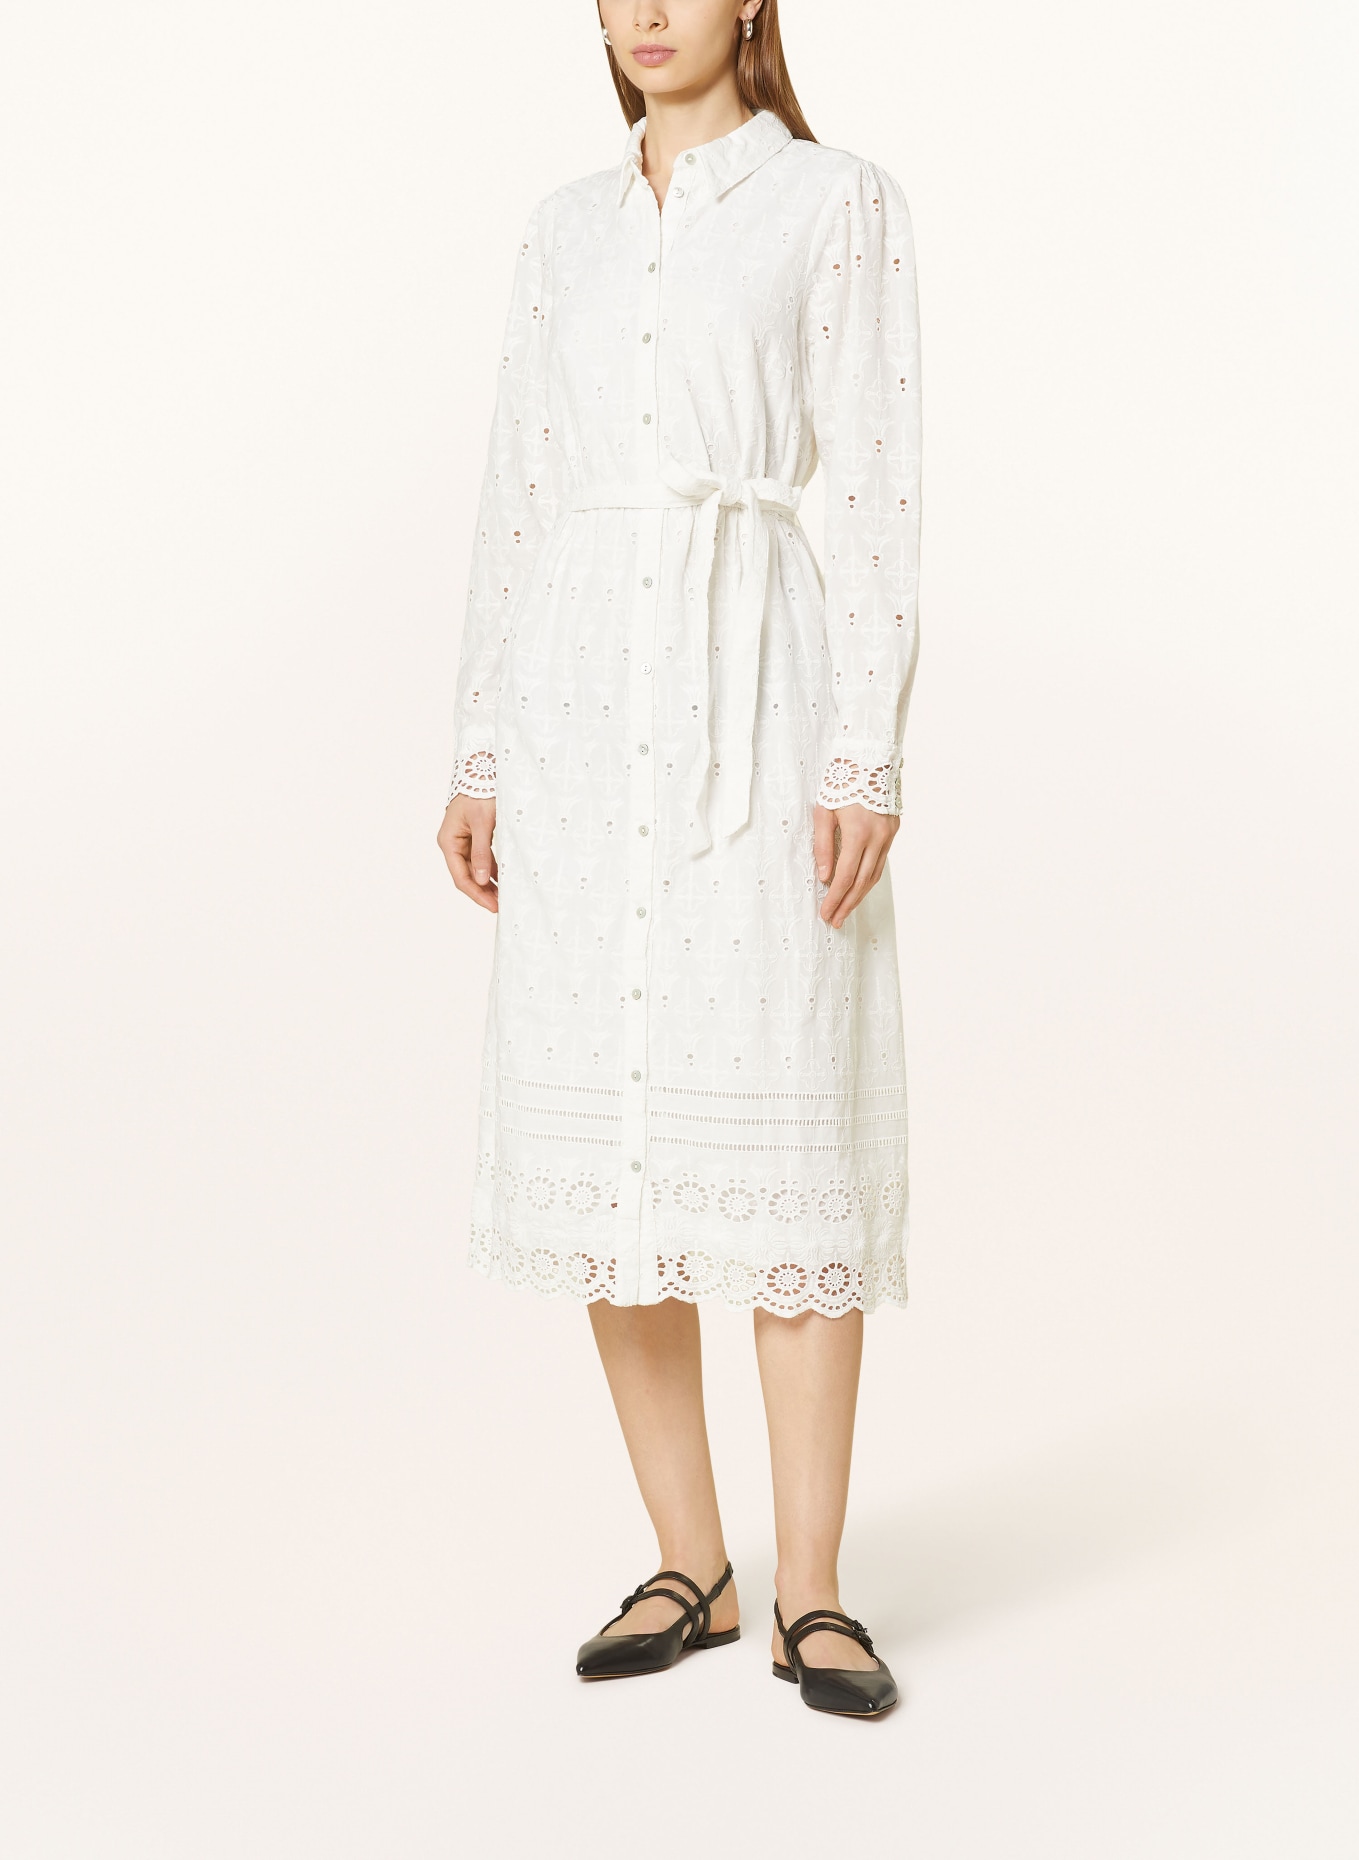 ROUGE VILA Shirt dress made of lace, Color: WHITE (Image 2)